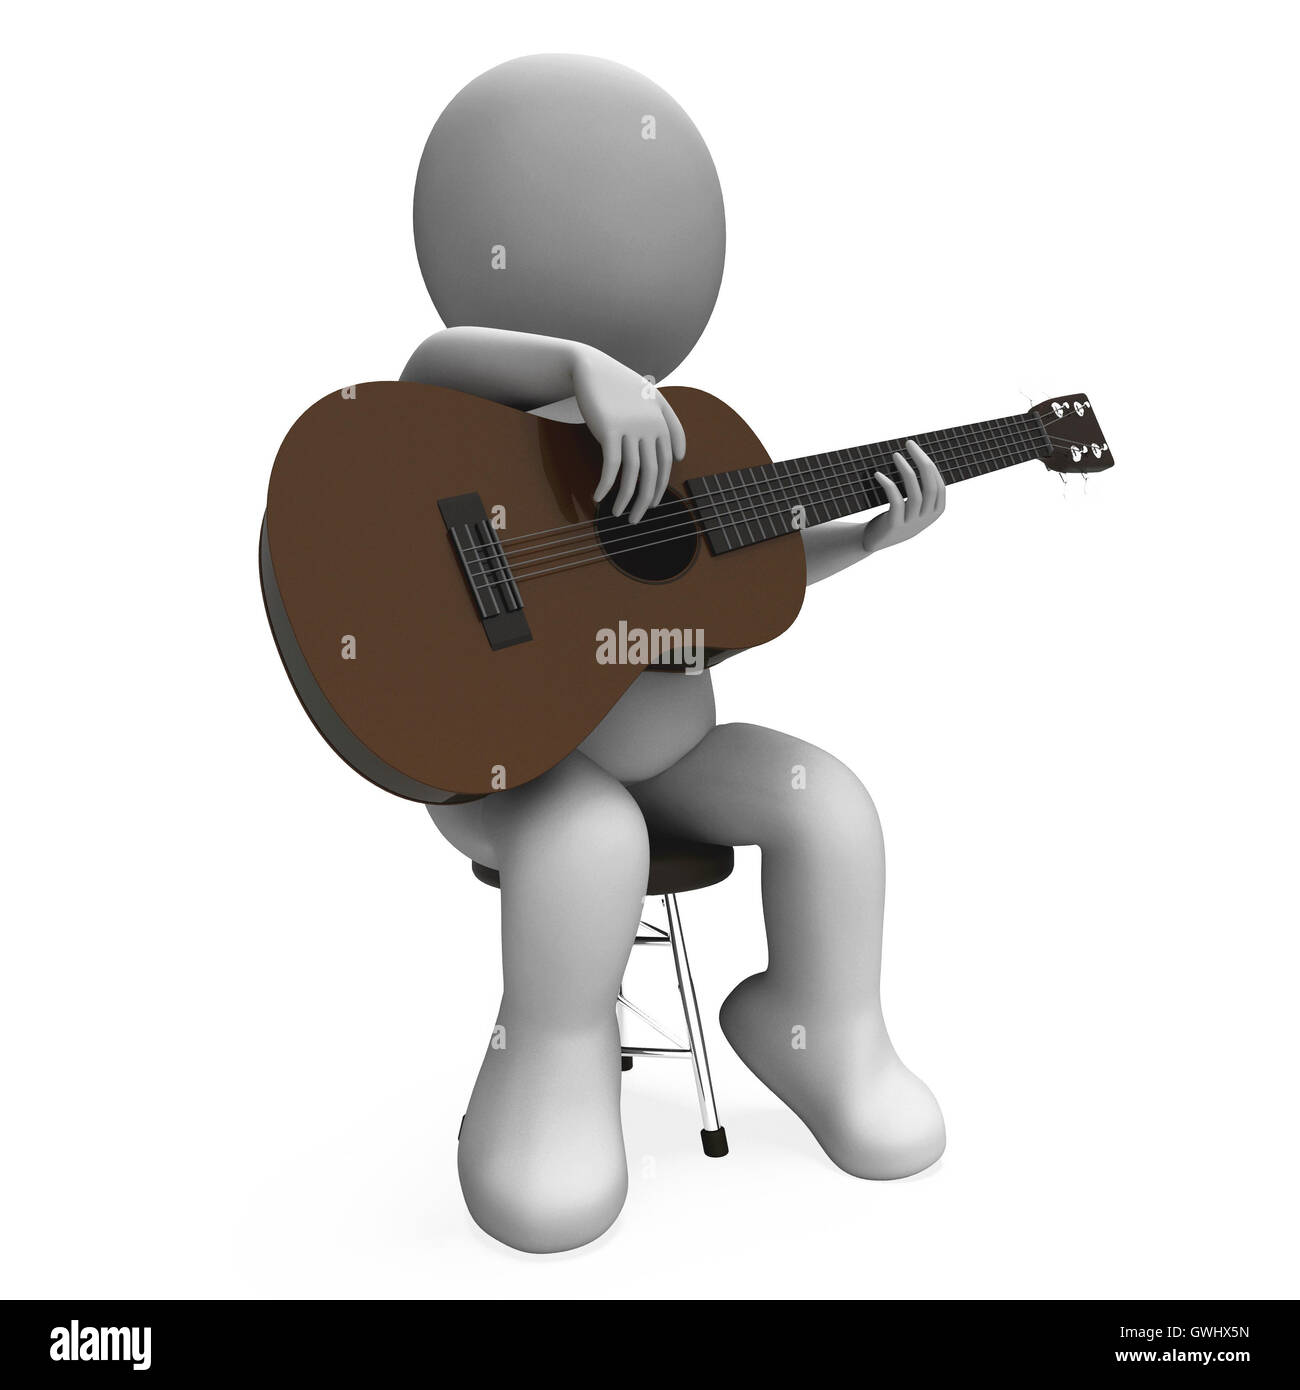 Acoustic Guitar Character Shows Guitarist Music And Performance Stock Photo